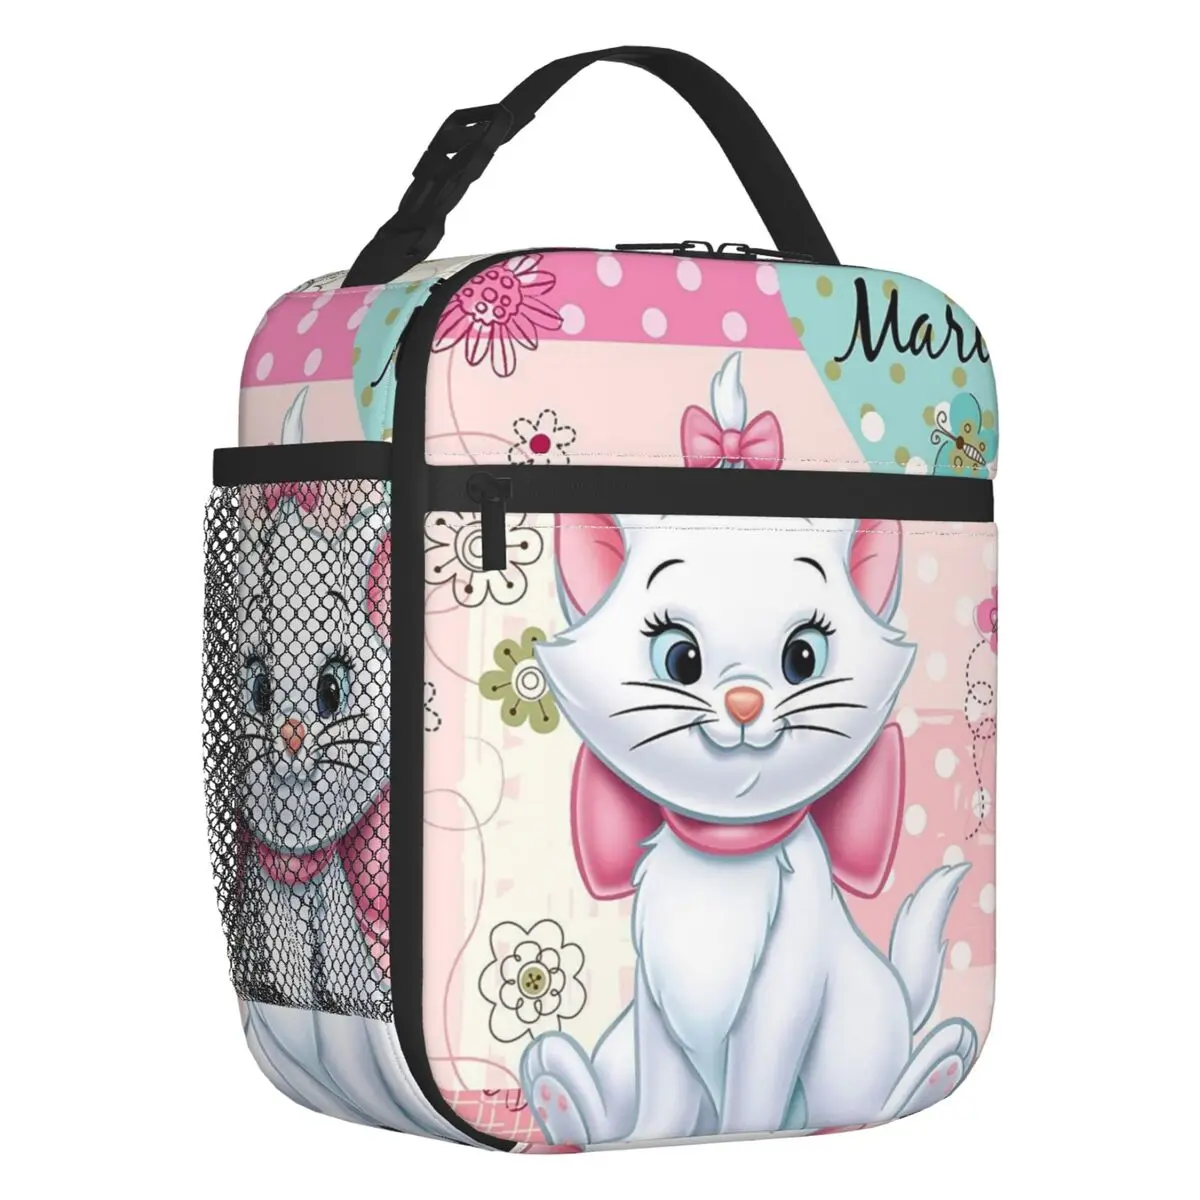 

Movie Marie Cat Insulated Lunch Tote Bag for Women Funny Kitten Film Resuable Thermal Cooler Bento Box Work School Travel